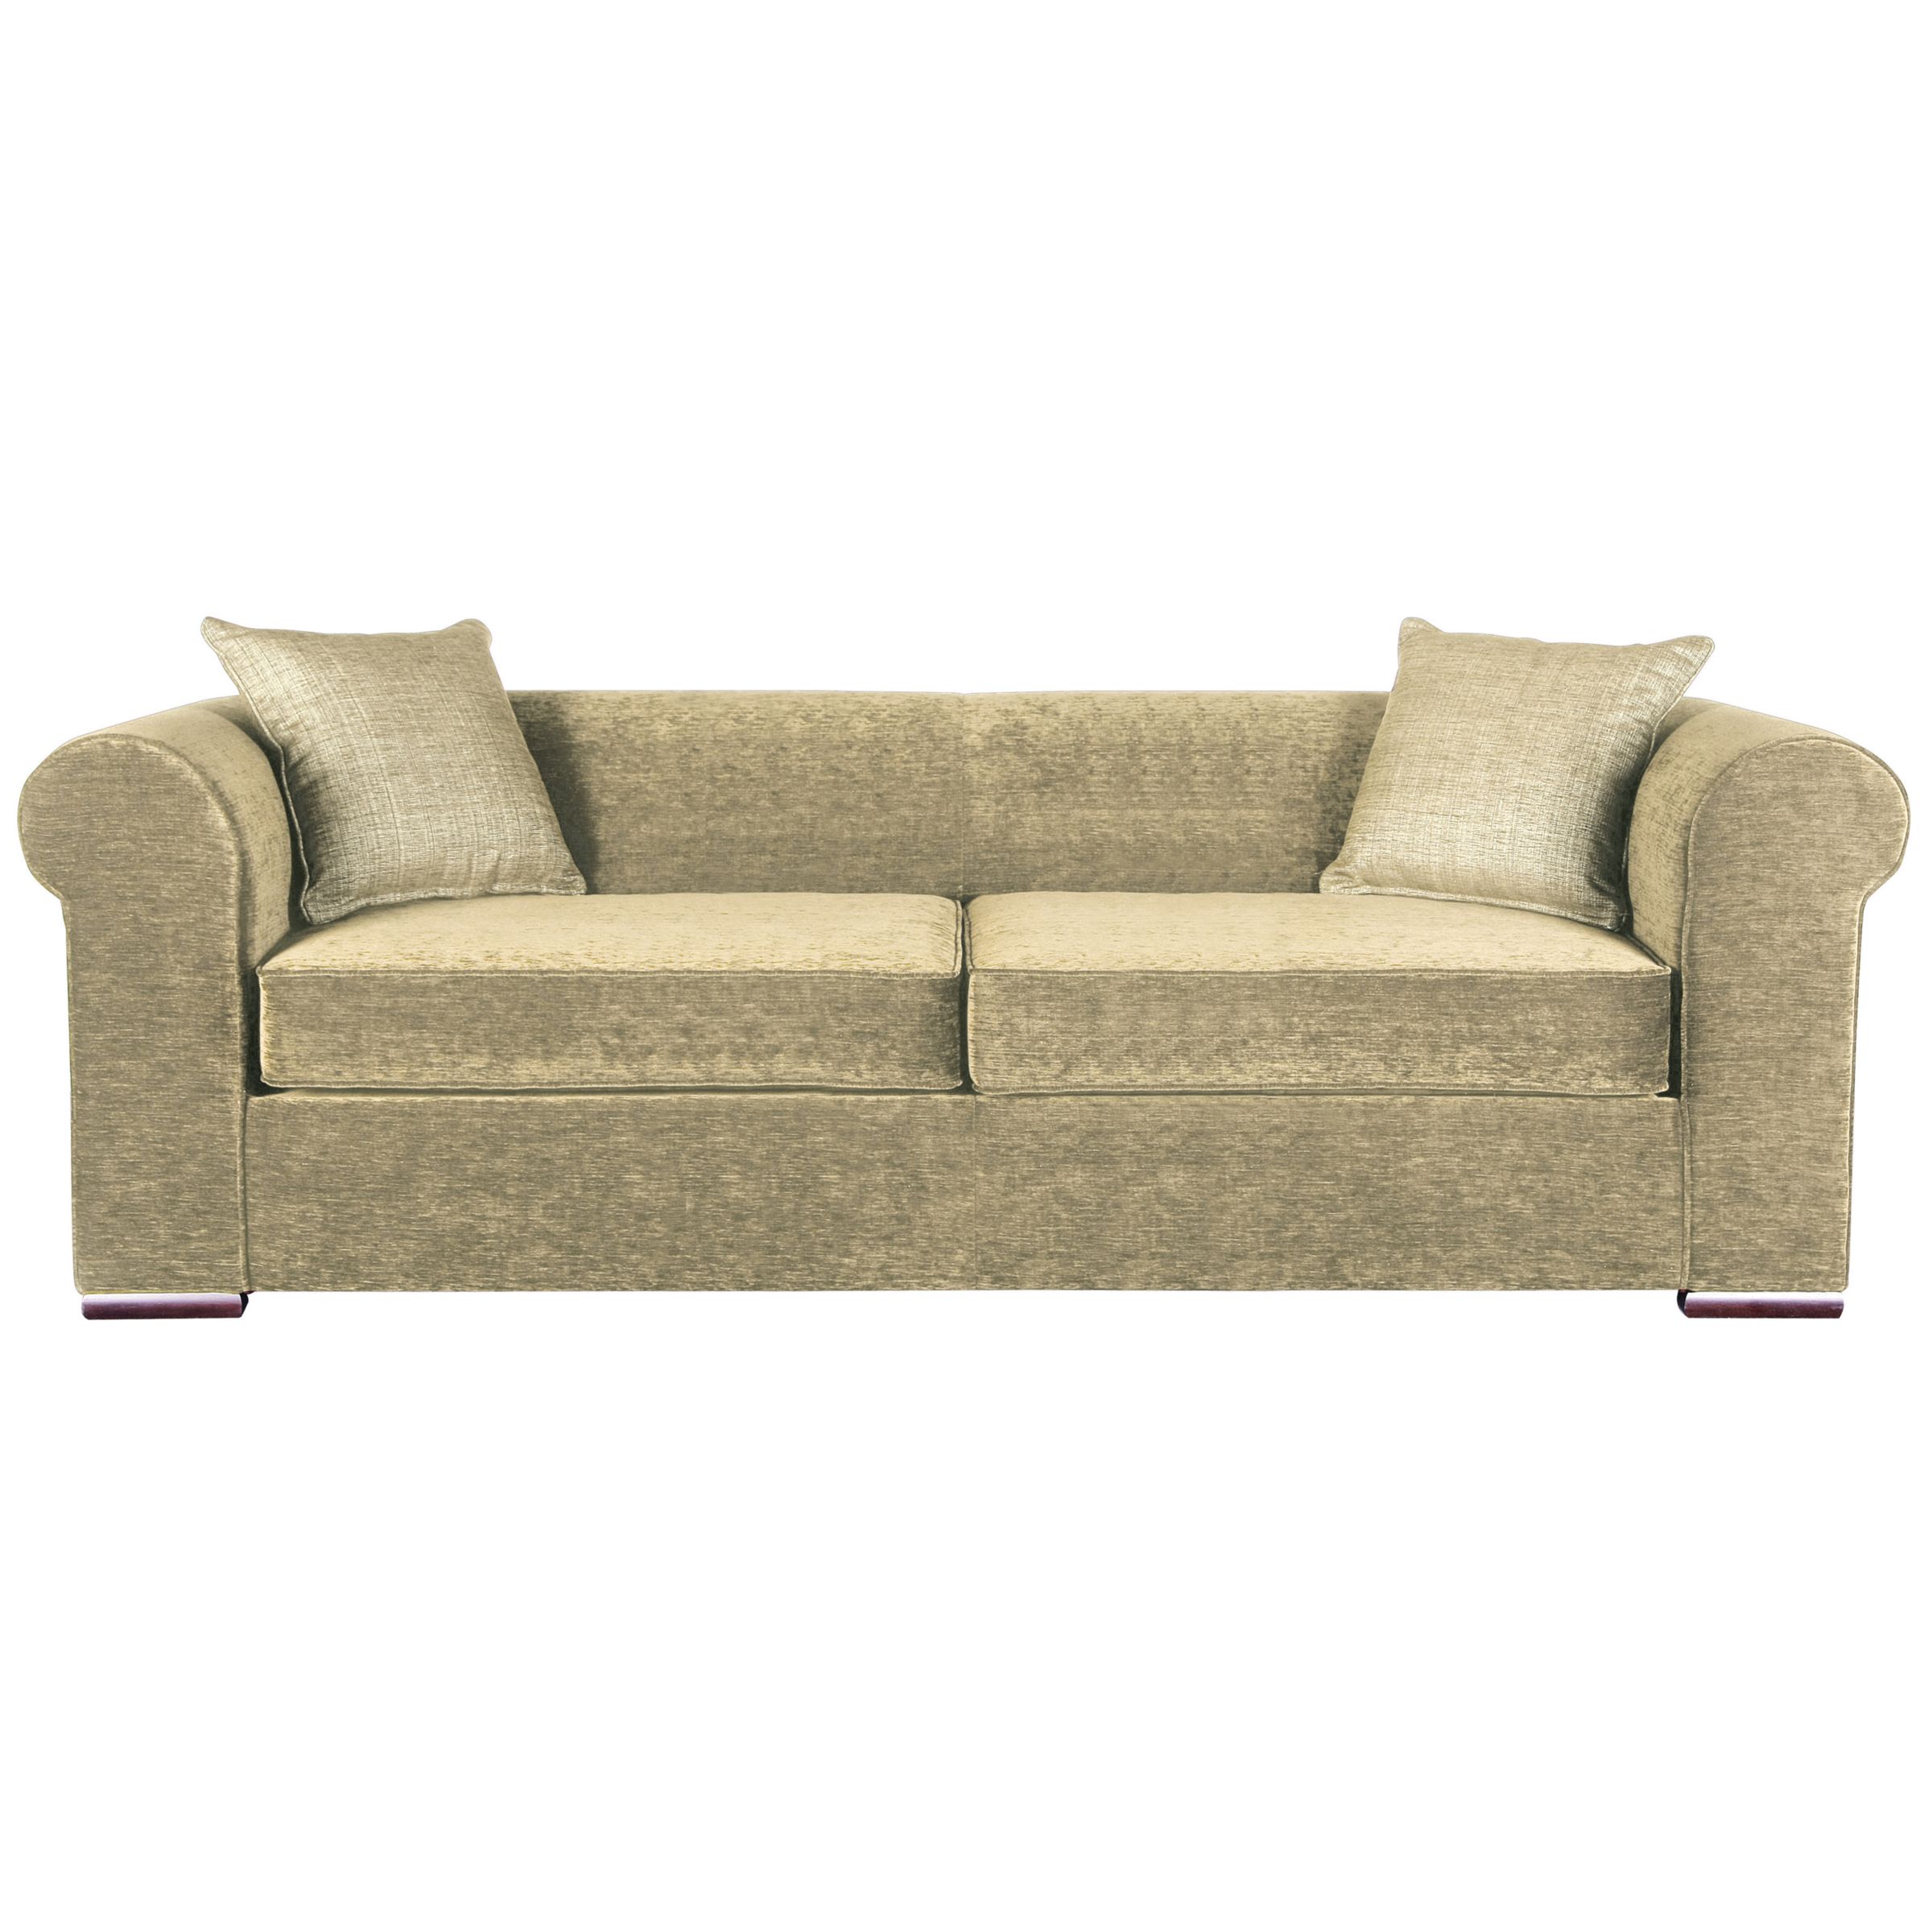 John Lewis Chilton Grand Sofa Bed with Sprung